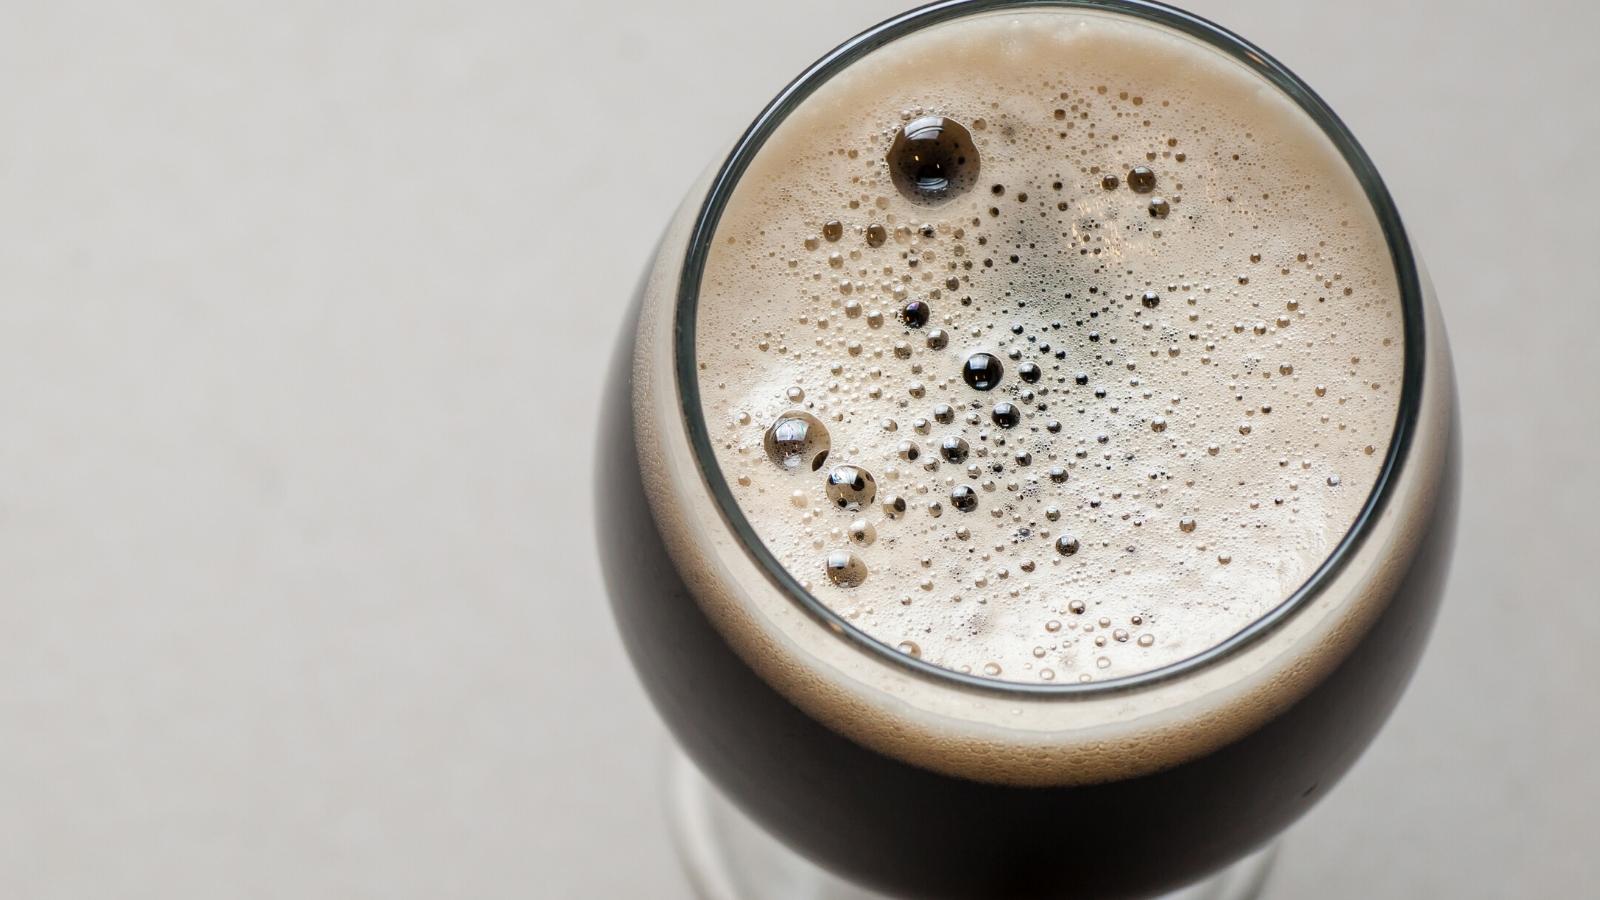 Chocolate stout beer